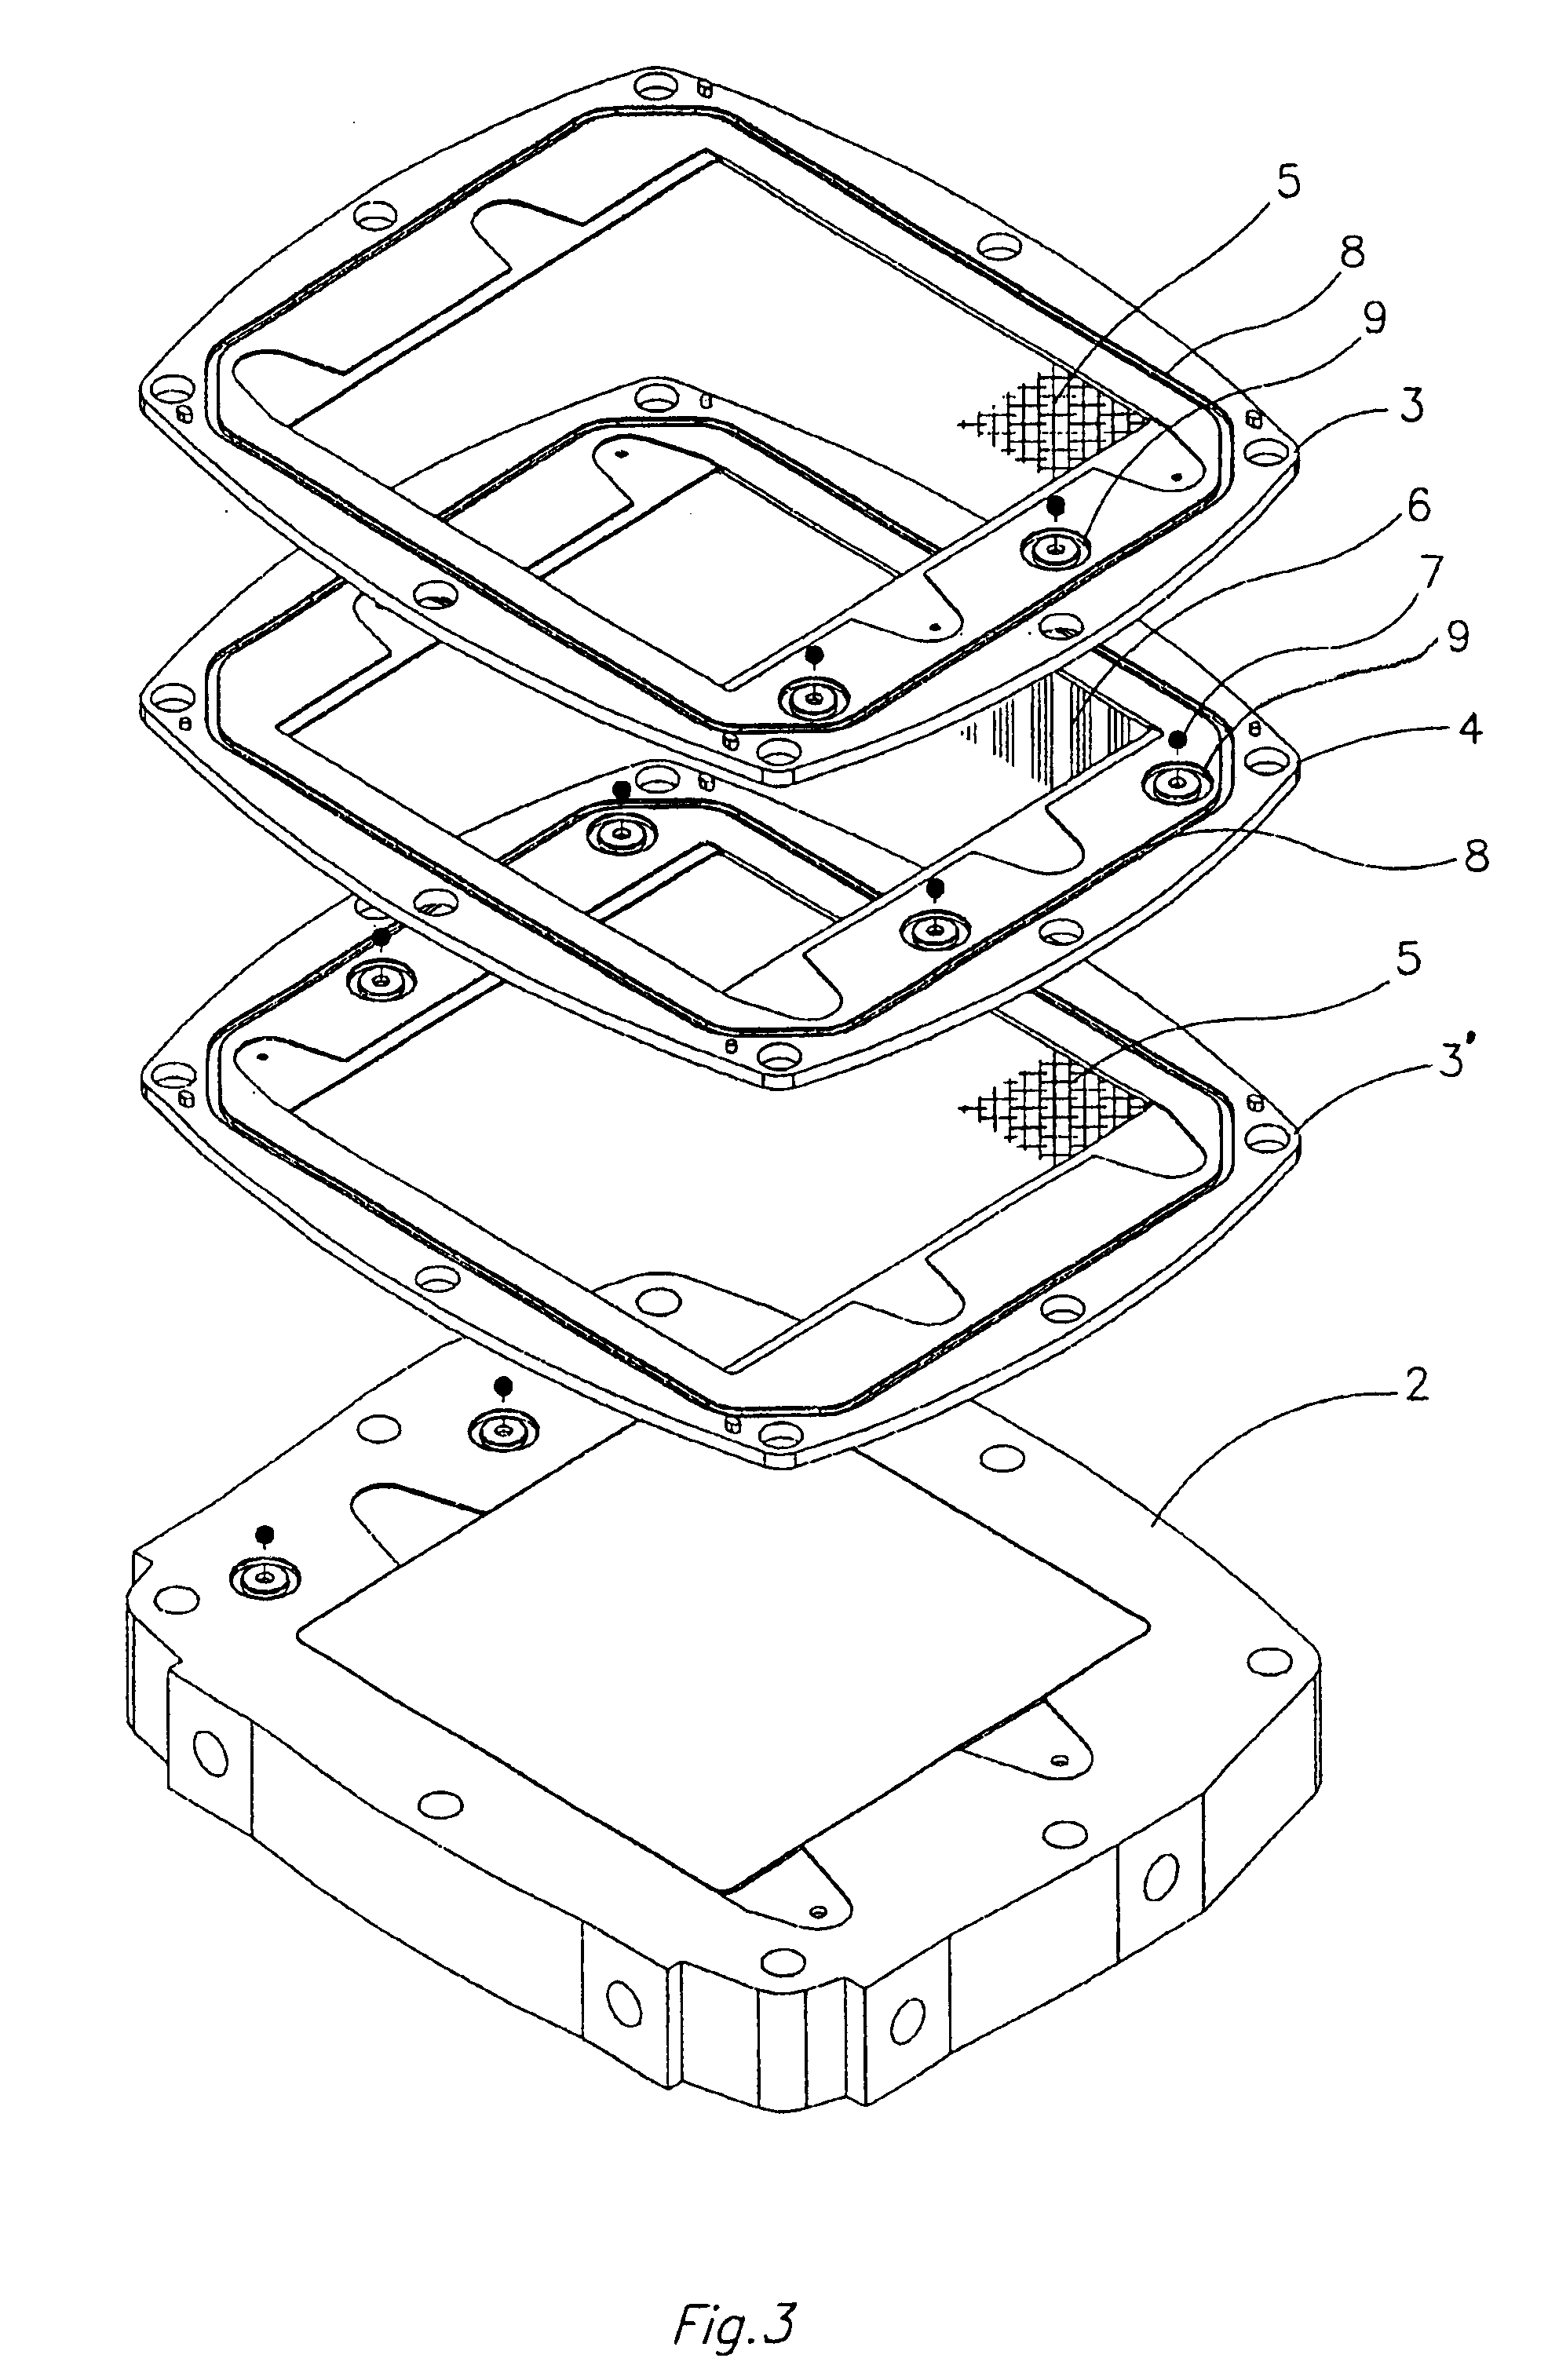 Redox flow battery and method of operating it